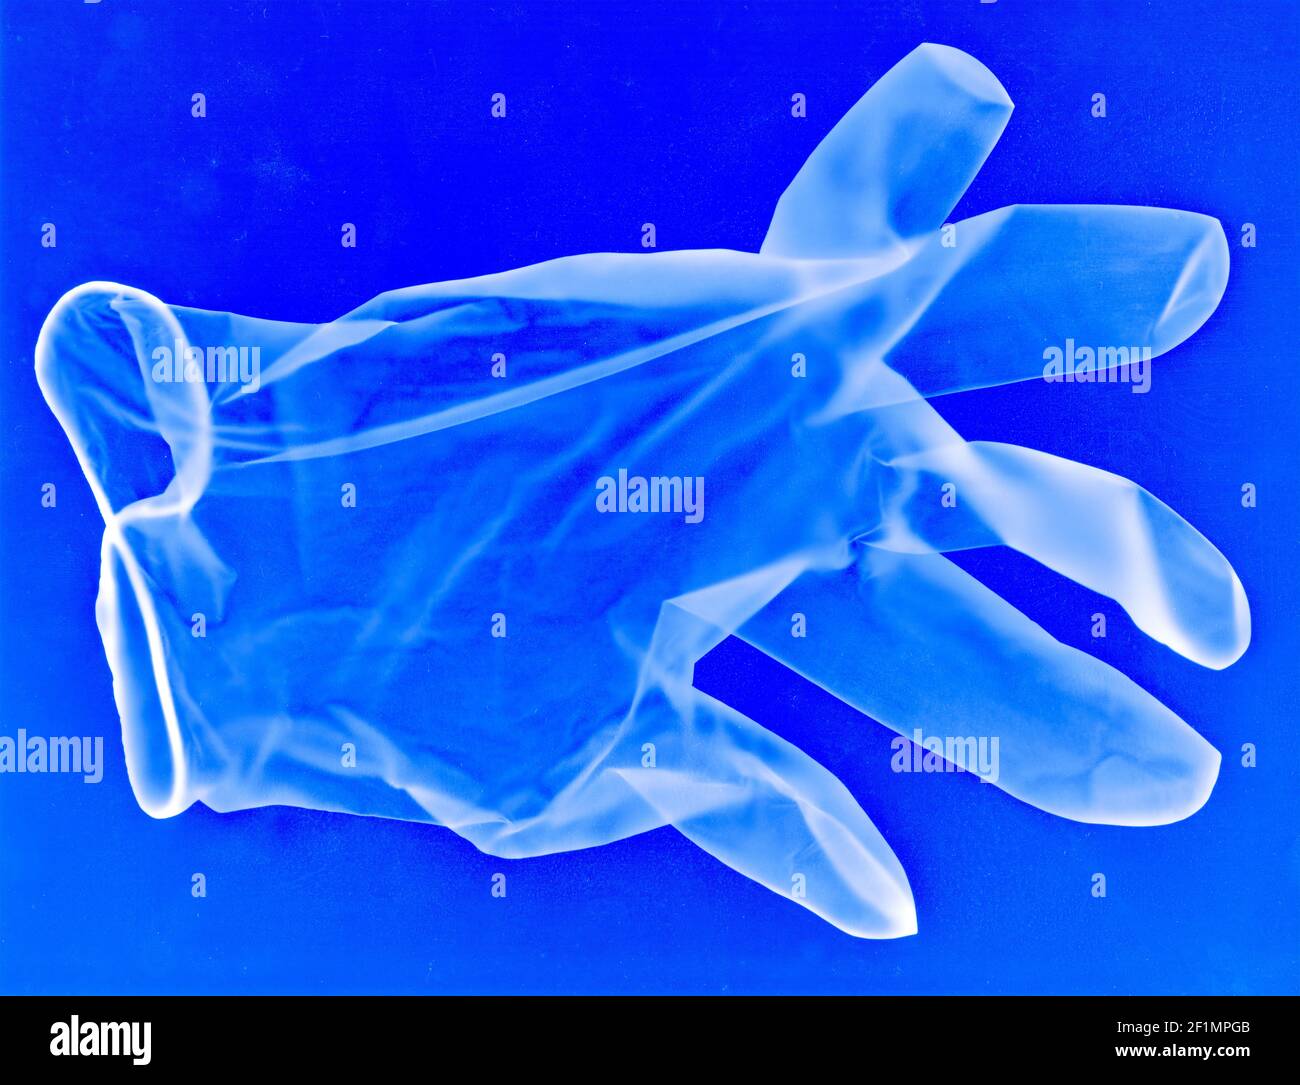 Medical latex disposable blue glove as an x-ray see-through image with possible virus, contamination and particles. Stock Photo